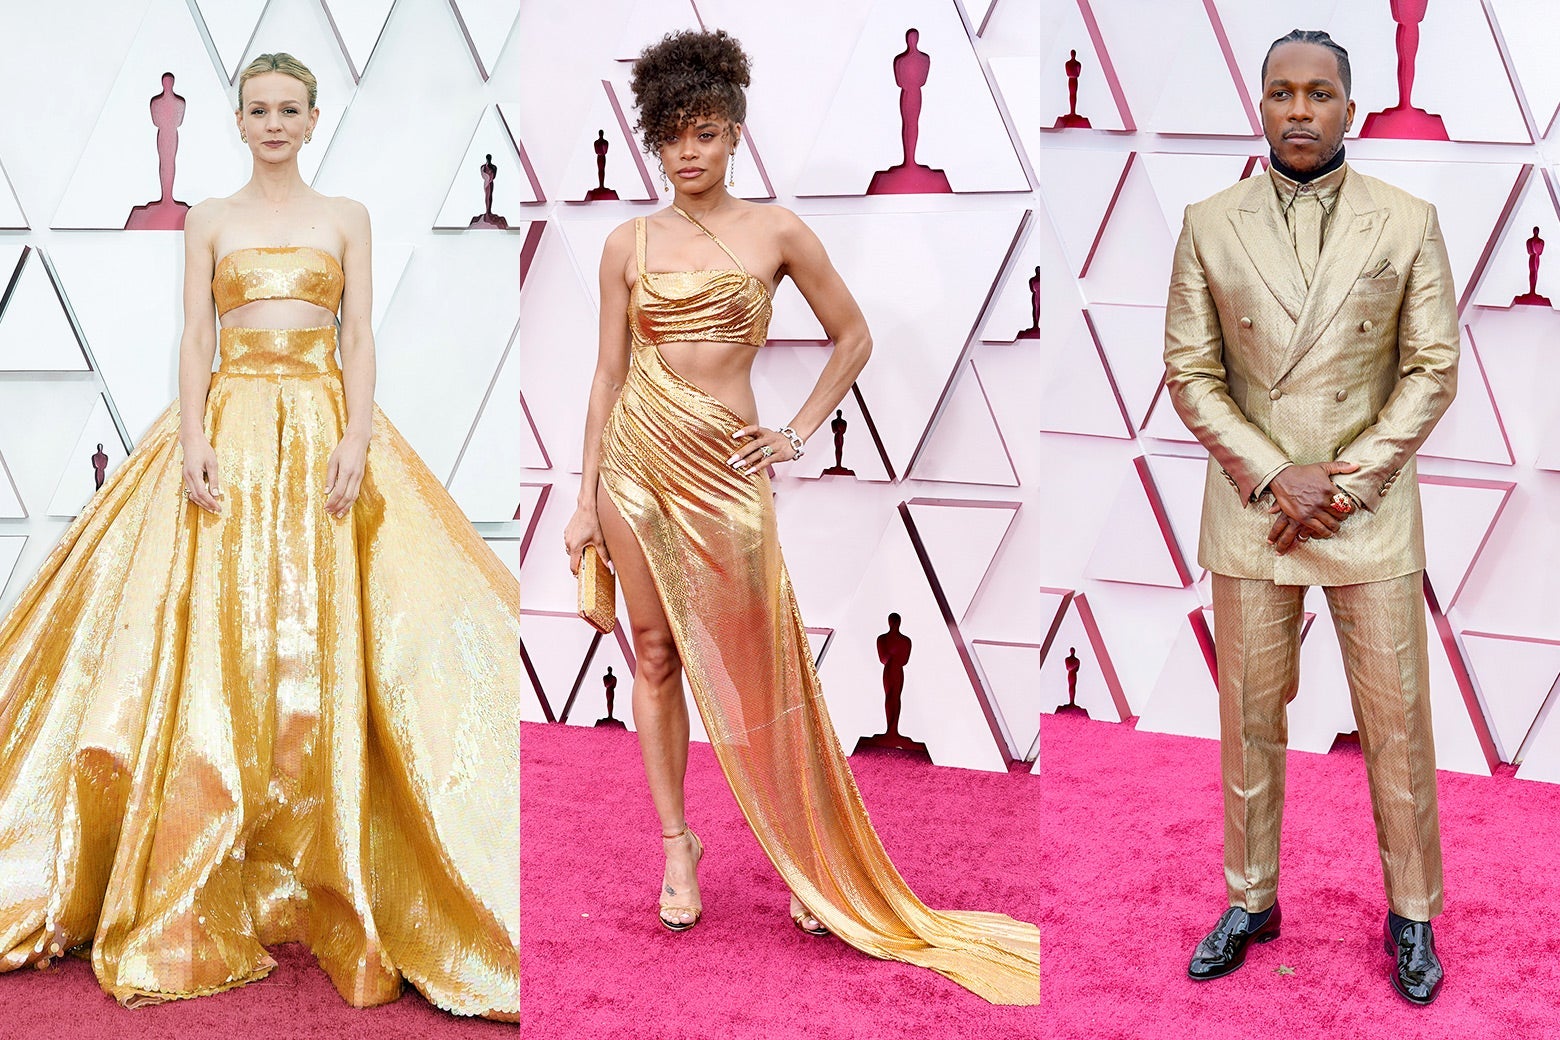 Carey Mulligan, Andra Day, and Leslie Odom Jr. pose on a red carpet.